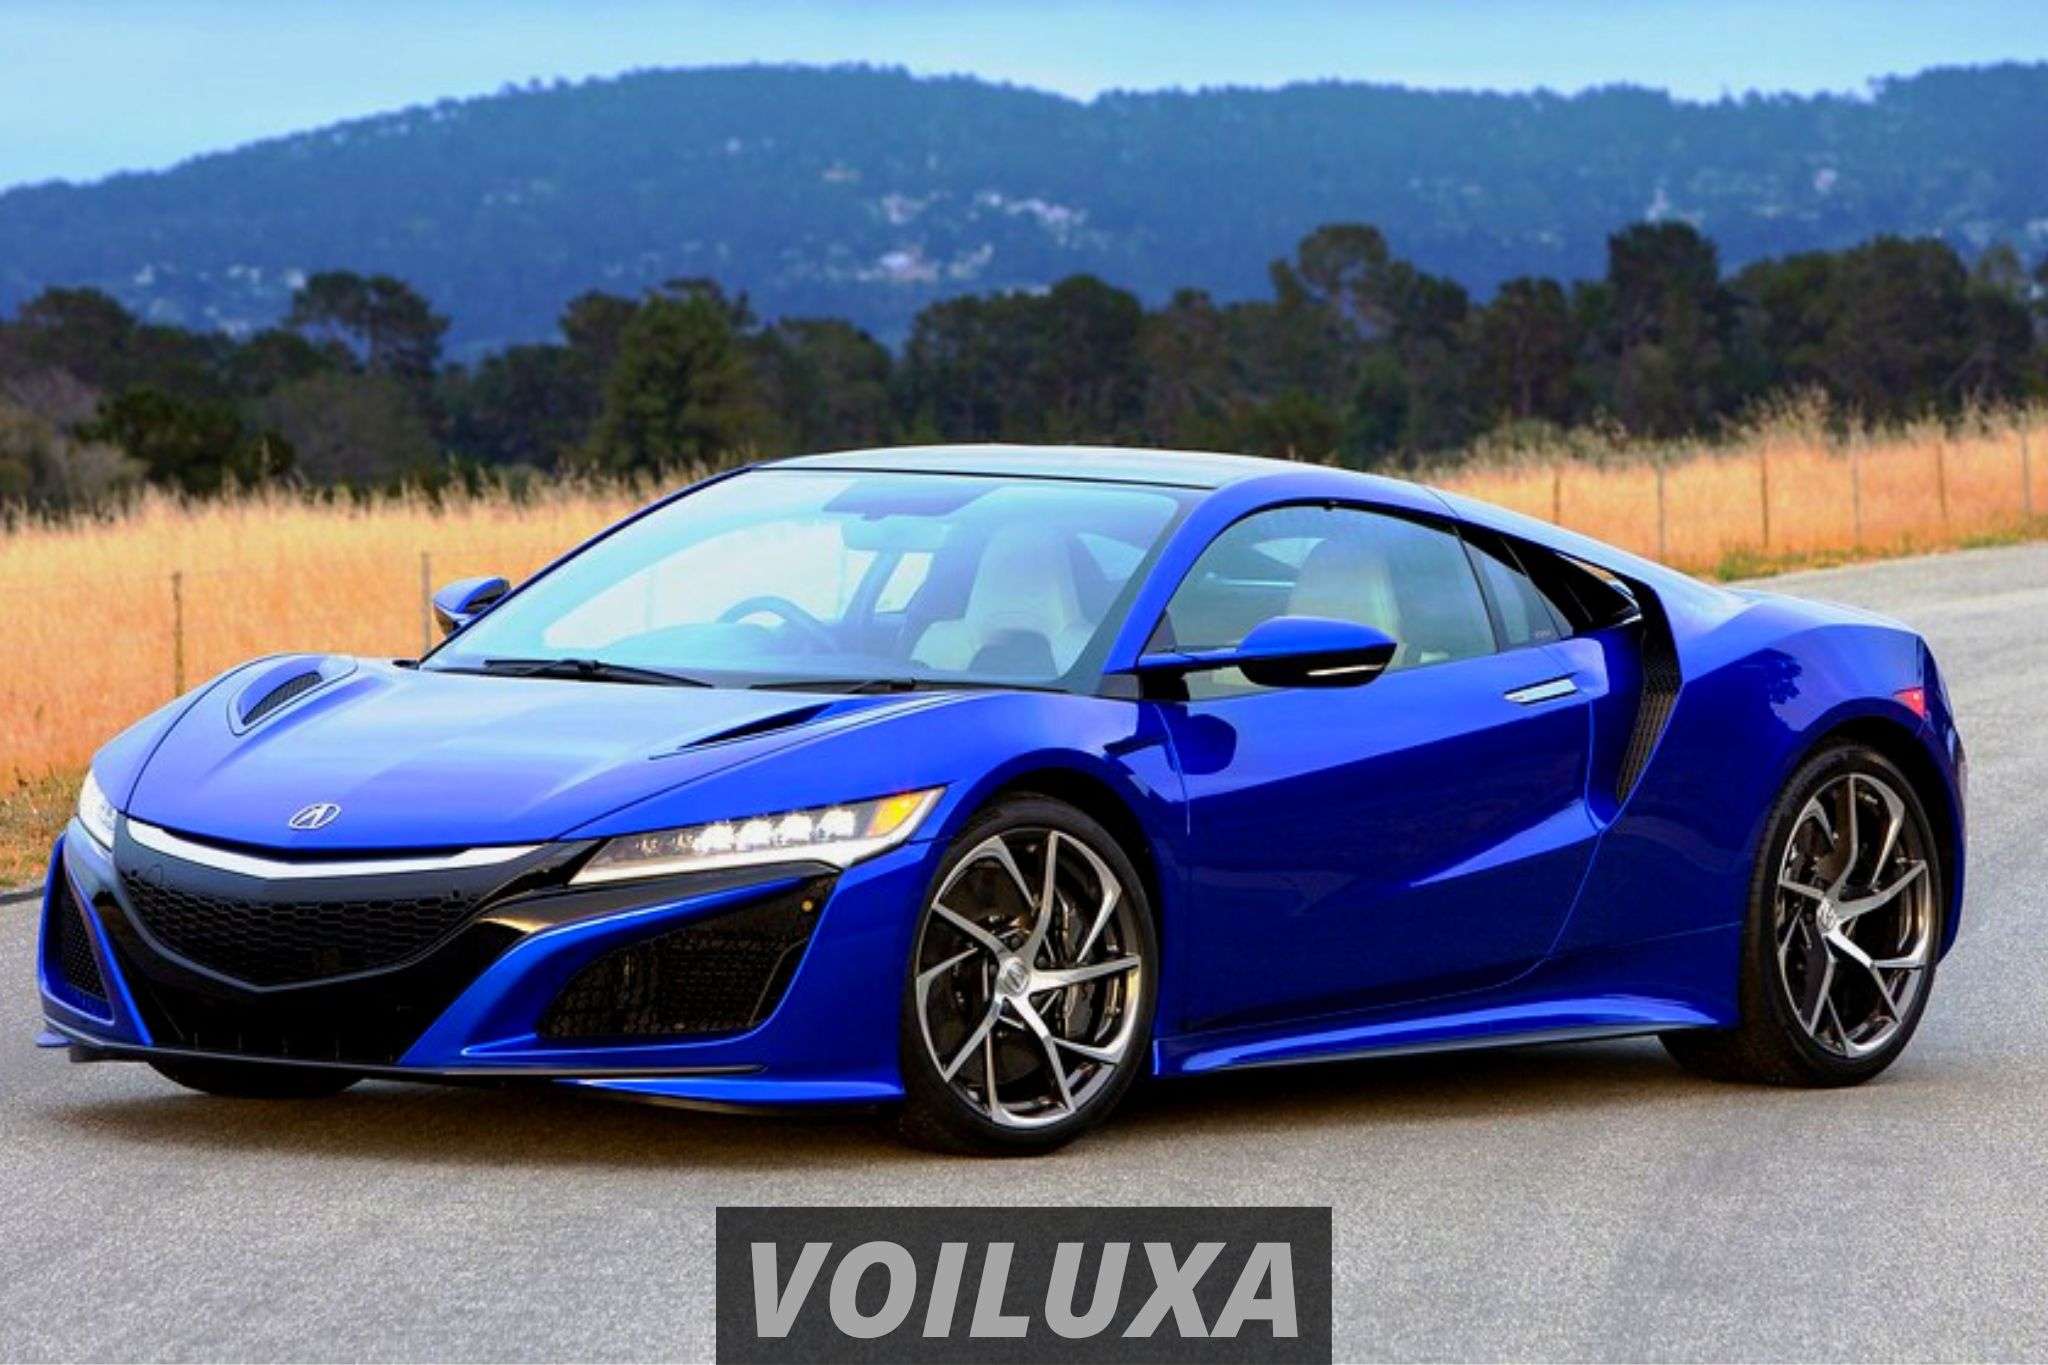 is-acura-a-luxury-car-you-might-be-surprised-voiluxa